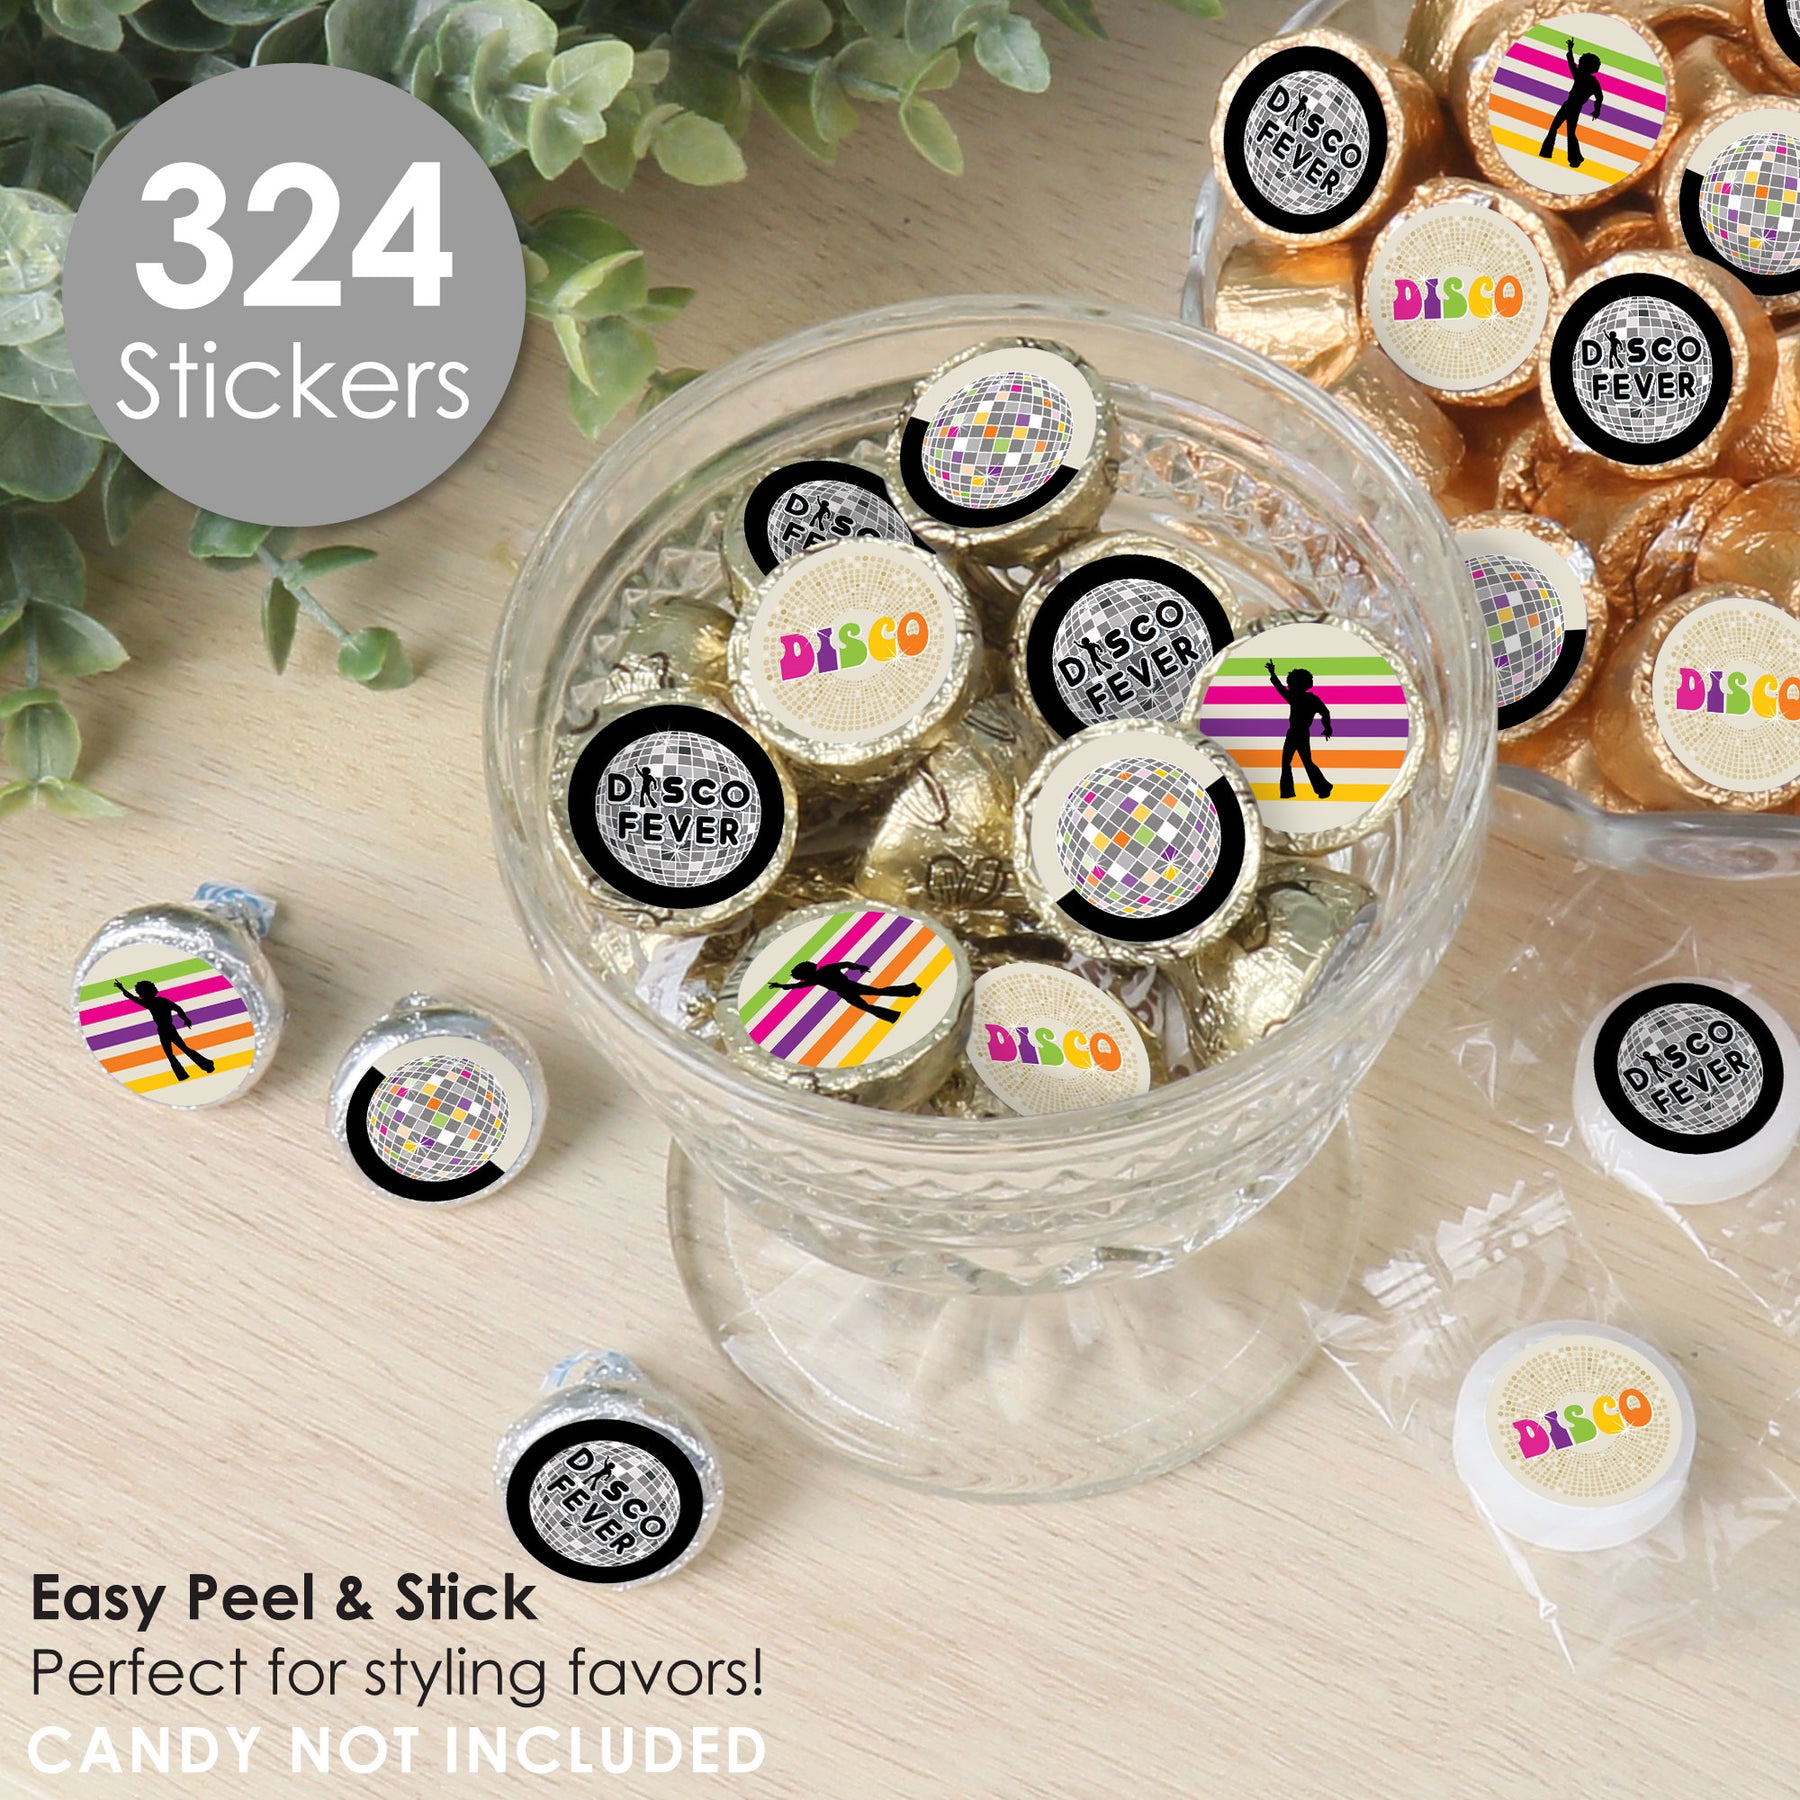 70's Disco - 1970s Disco Fever Party Small Round Candy Stickers - Party  Favor Labels - 324 Count